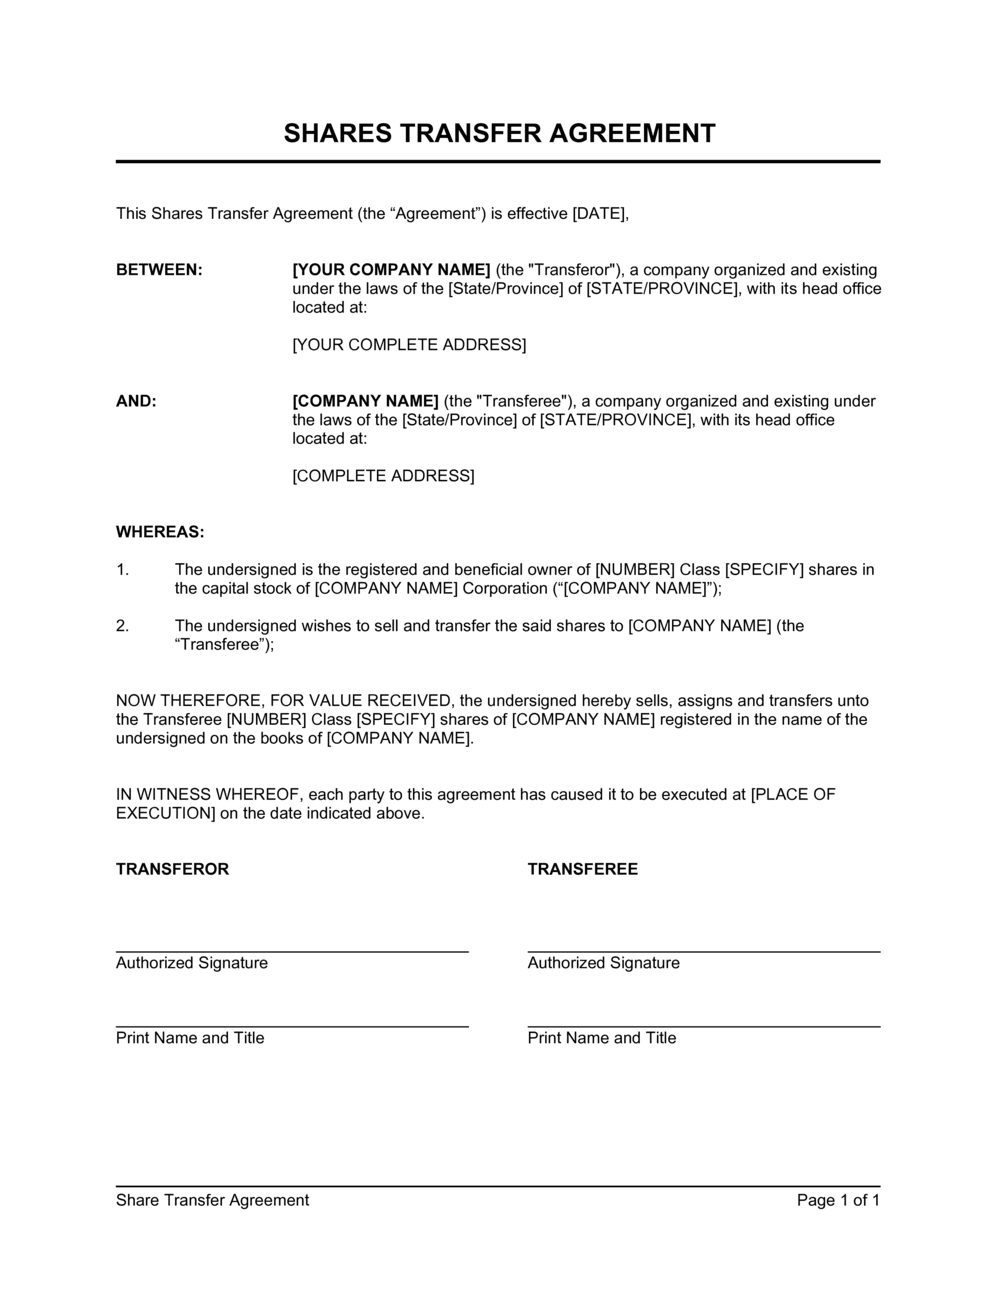 Shares Transfer Agreement Short Template  by Business-in-a-Box™ Inside handover agreement template